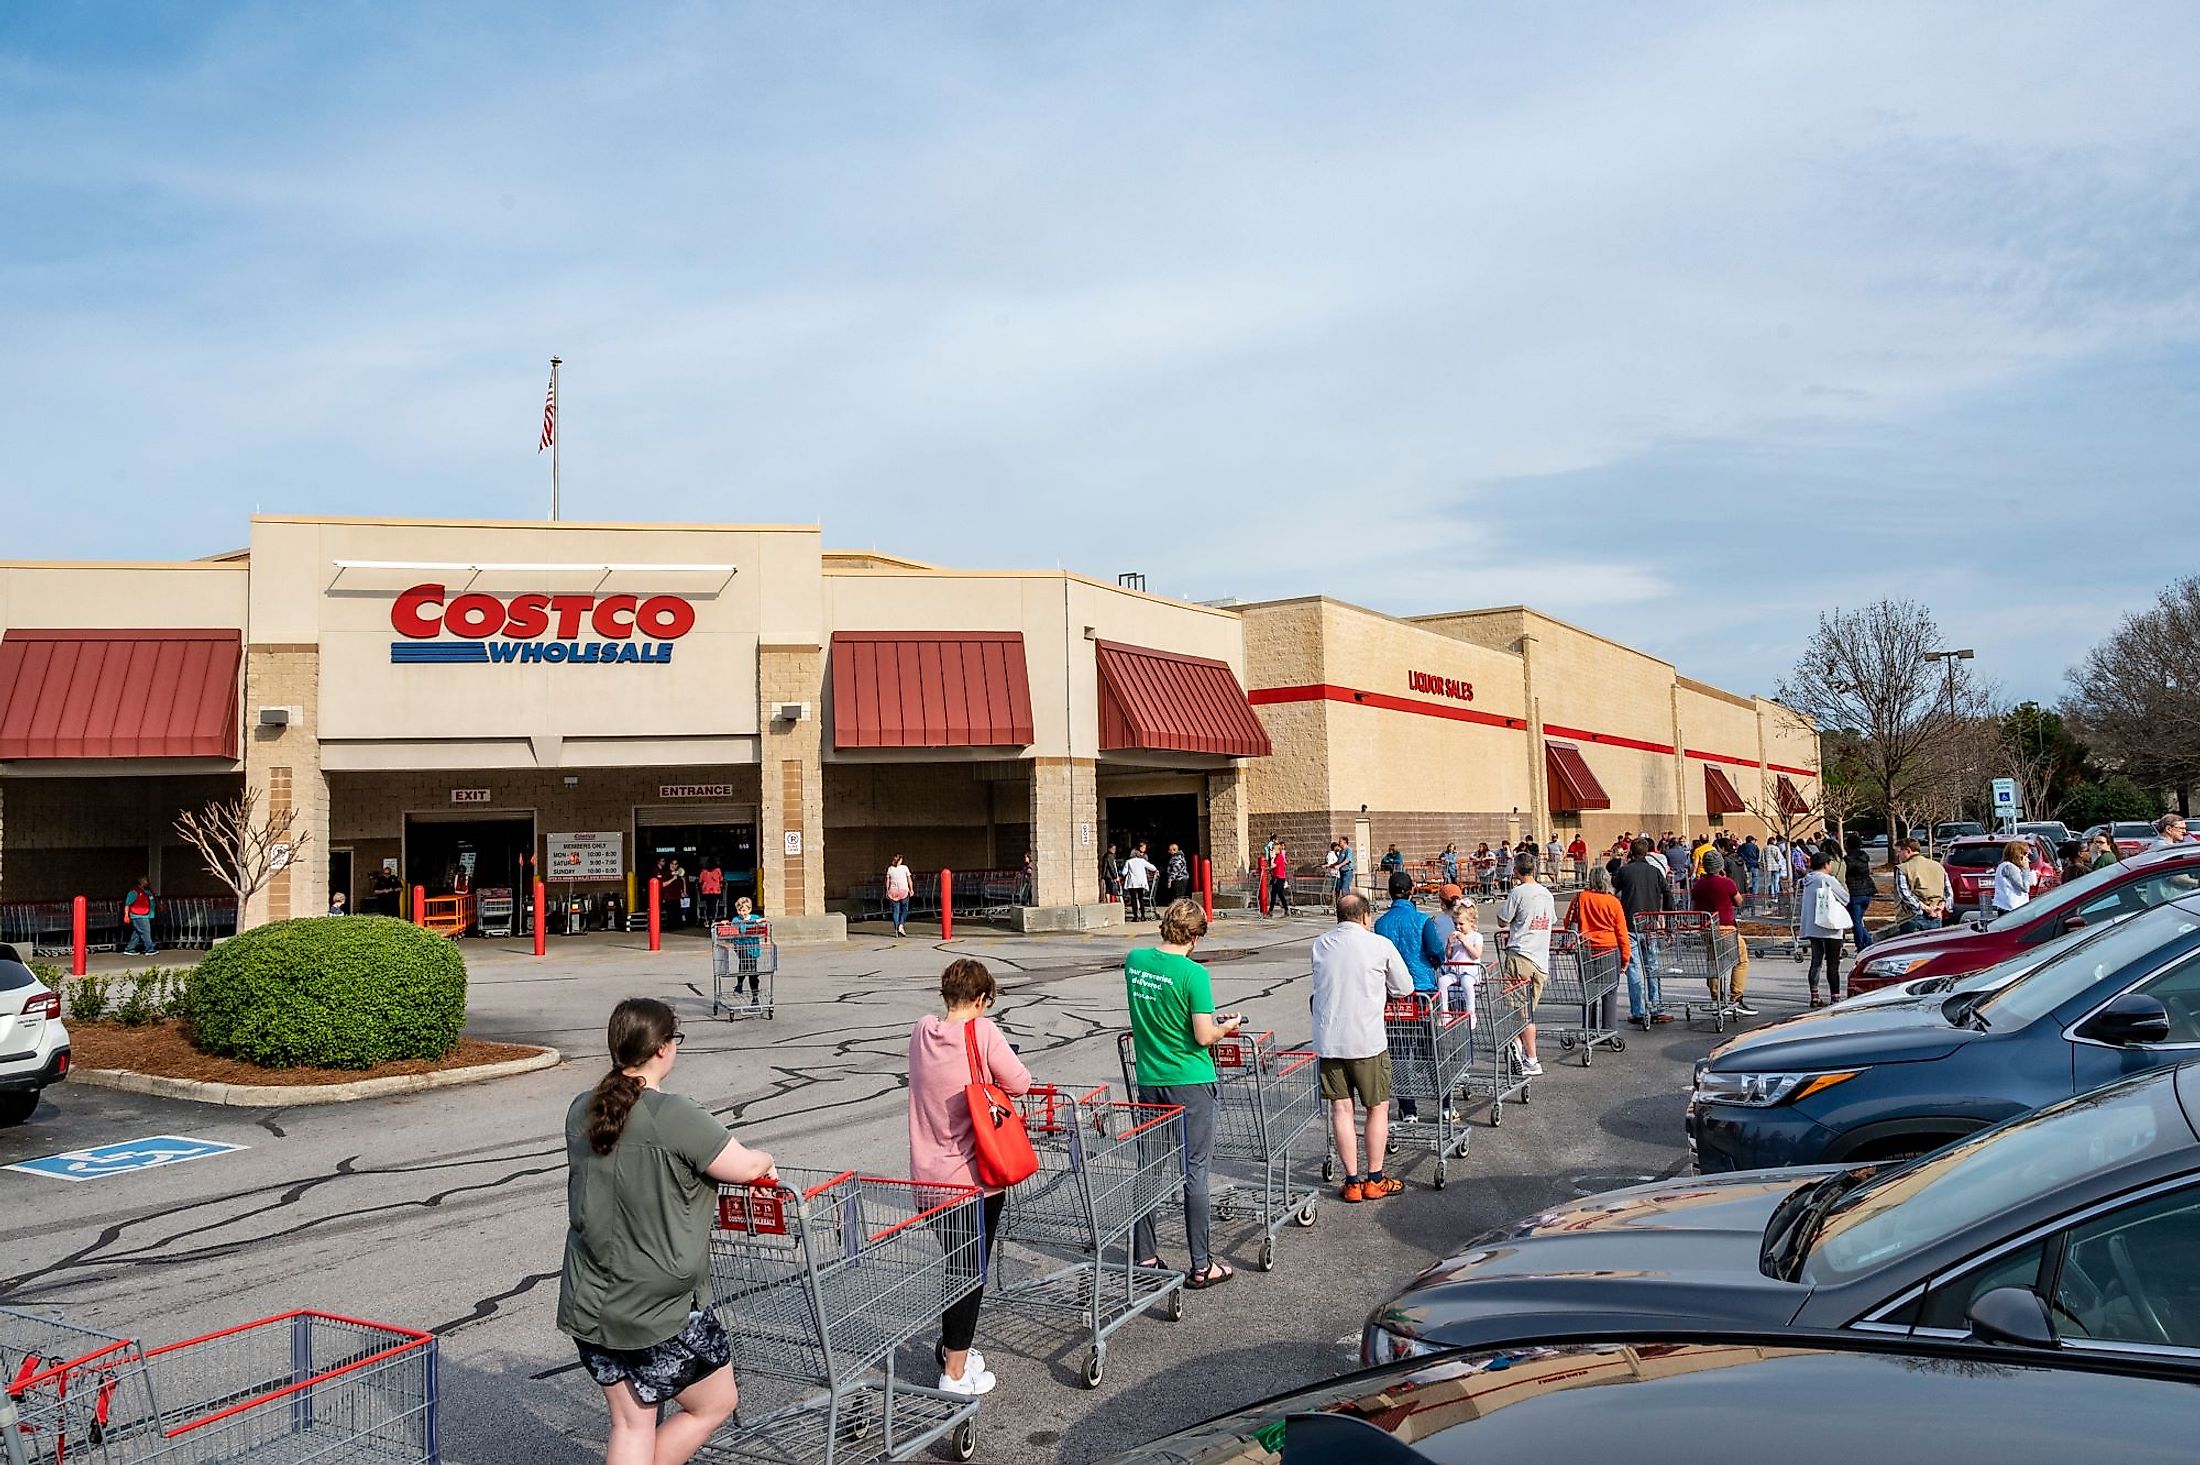 Shoppers waiting in line to get into a Costco store in Hoover, Alabama. Editorial credit: Cavan-Images / Shutterstock.com